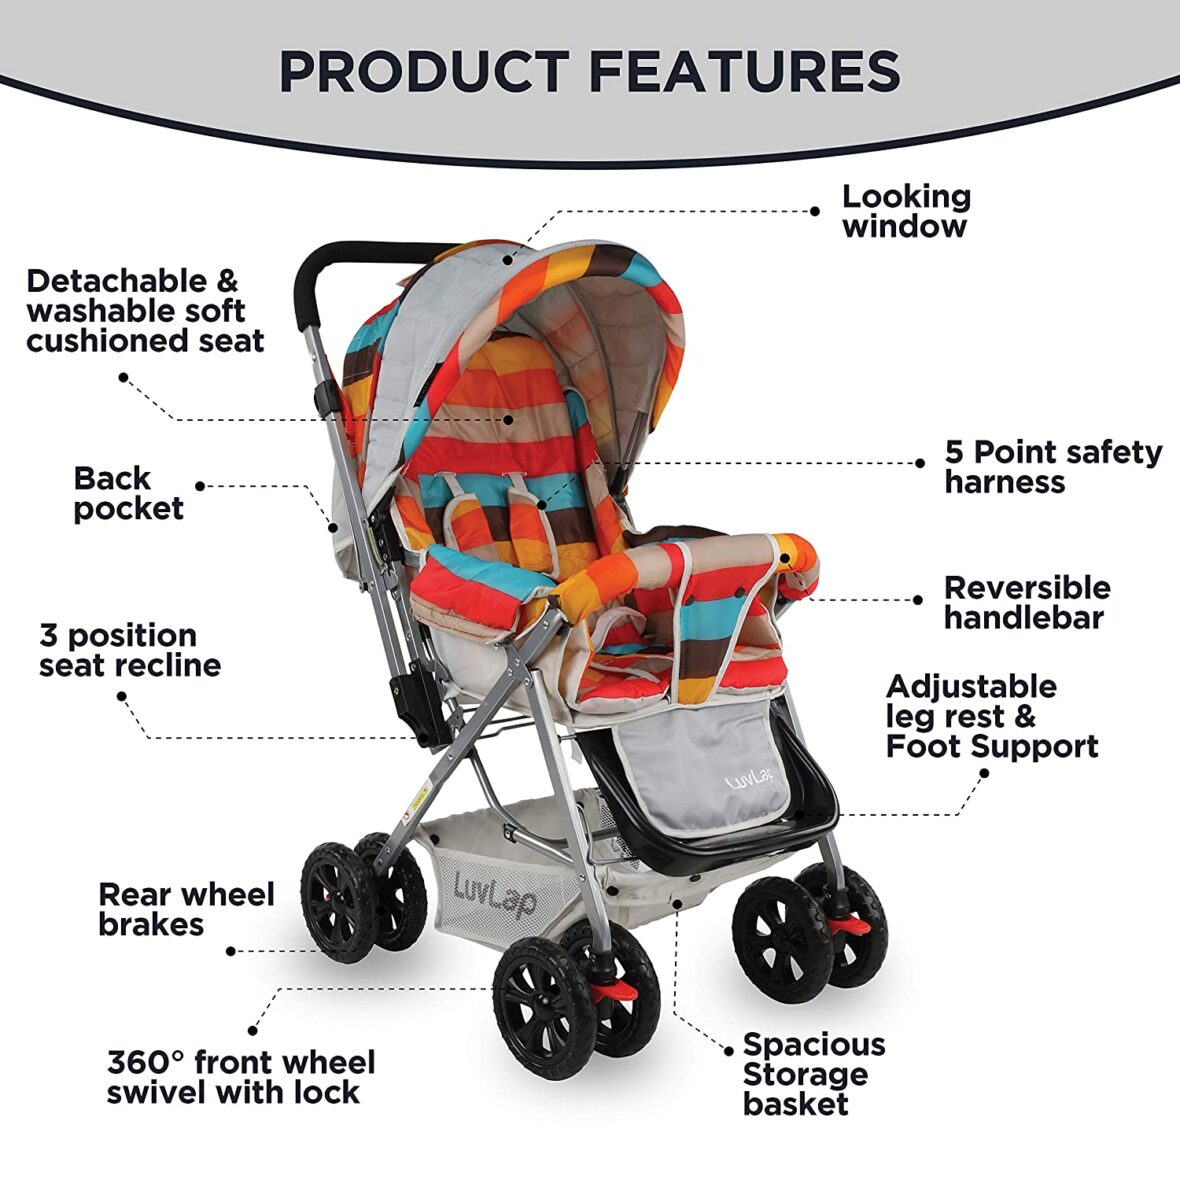 LuvLap Sunshine Stroller/Pram, Easy Fold, for Newborn Baby to Kids, 0-3 Years, Easy to fold & Carry, 3 position recline, 5 Point Safety Harness, Large wheels with brakes (Multicolor Stripes)18355